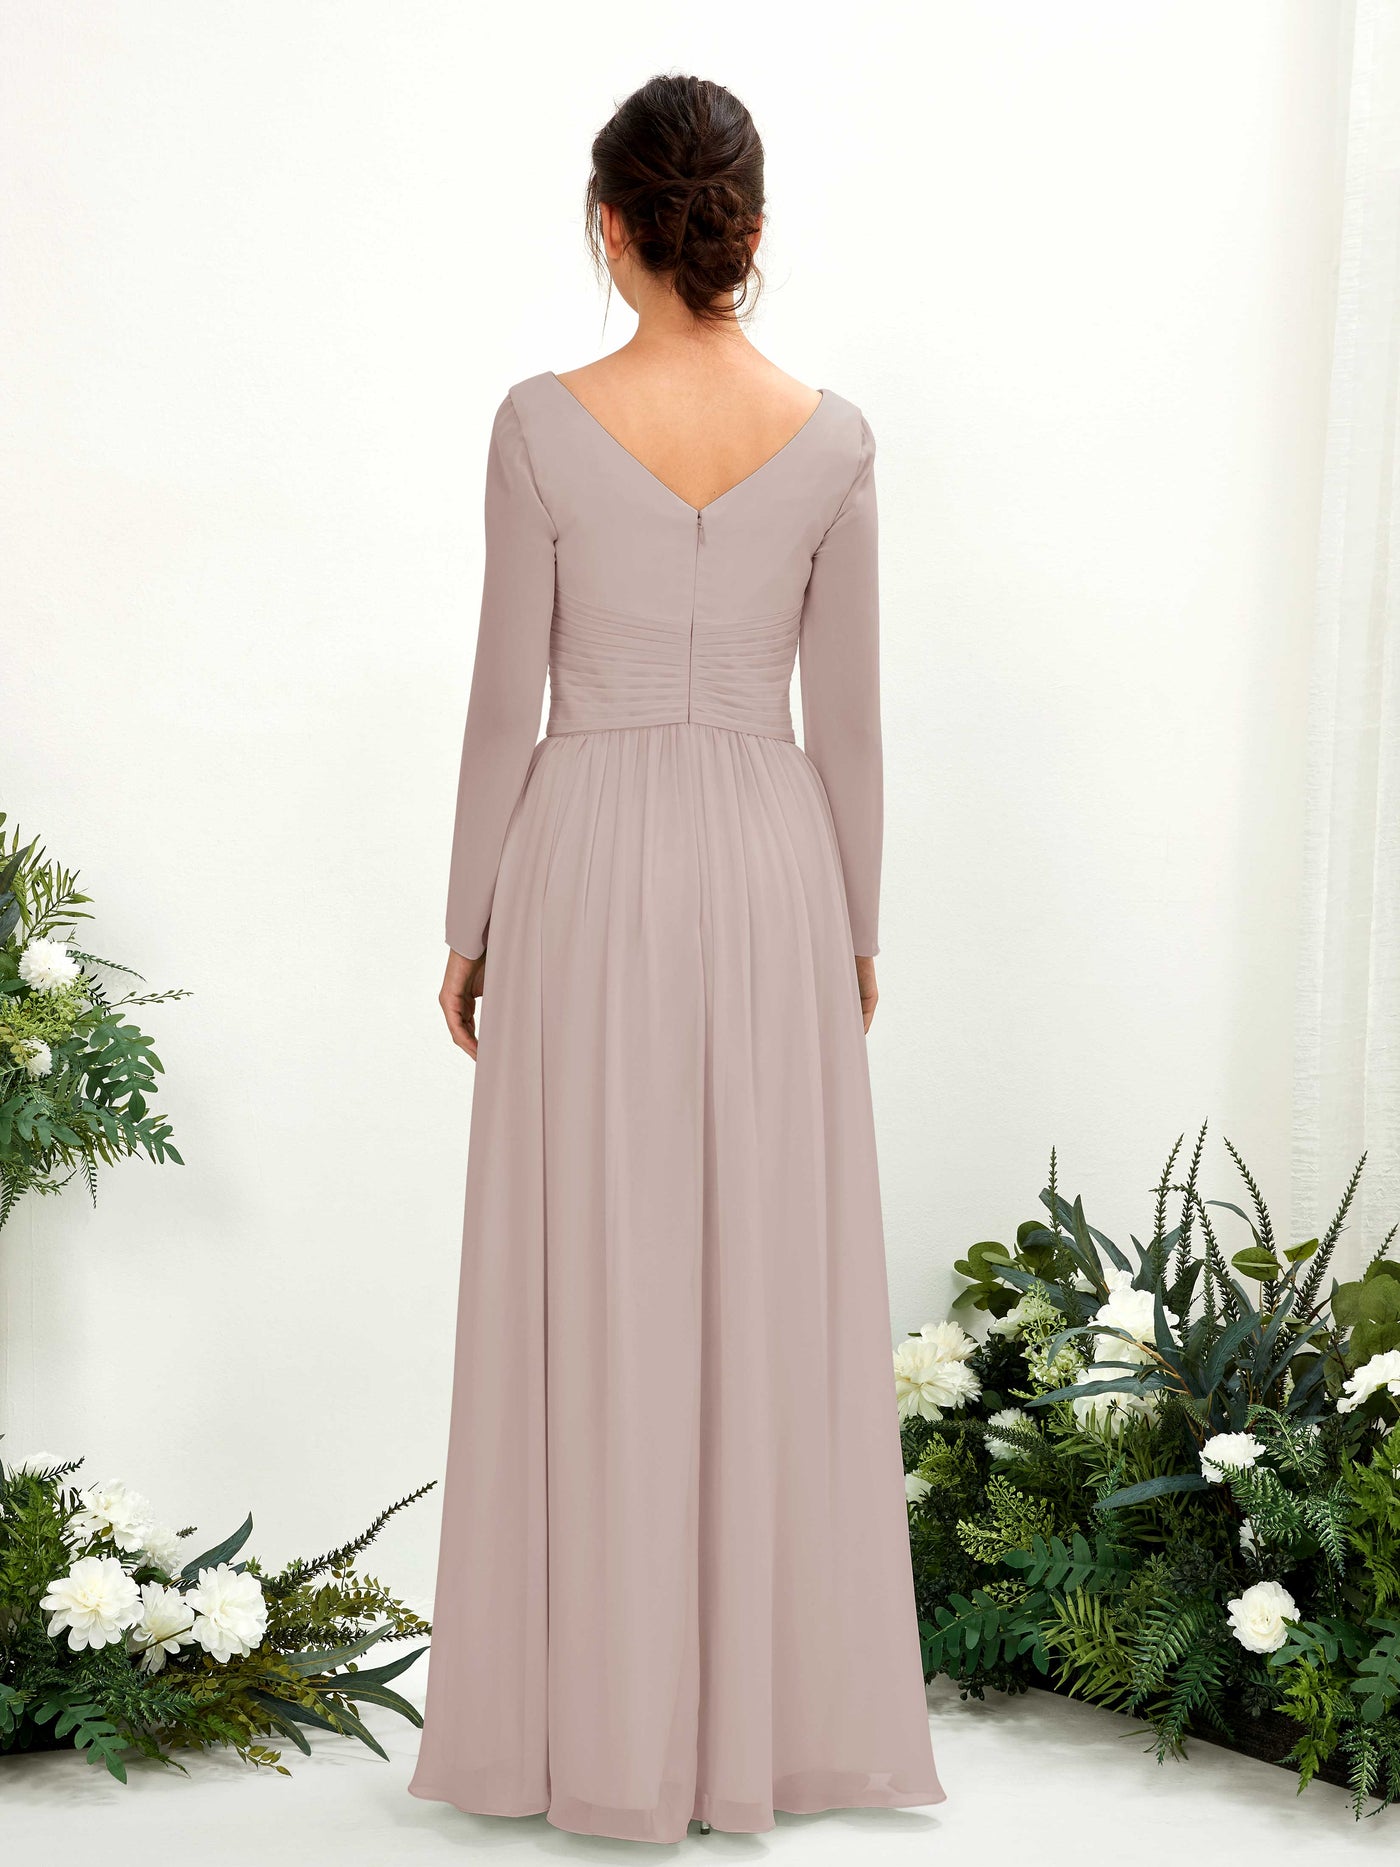 Taupe Bridesmaid Dresses Bridesmaid Dress A-line Chiffon V-neck Full Length Long Sleeves Wedding Party Dress (81220324)#color_taupe